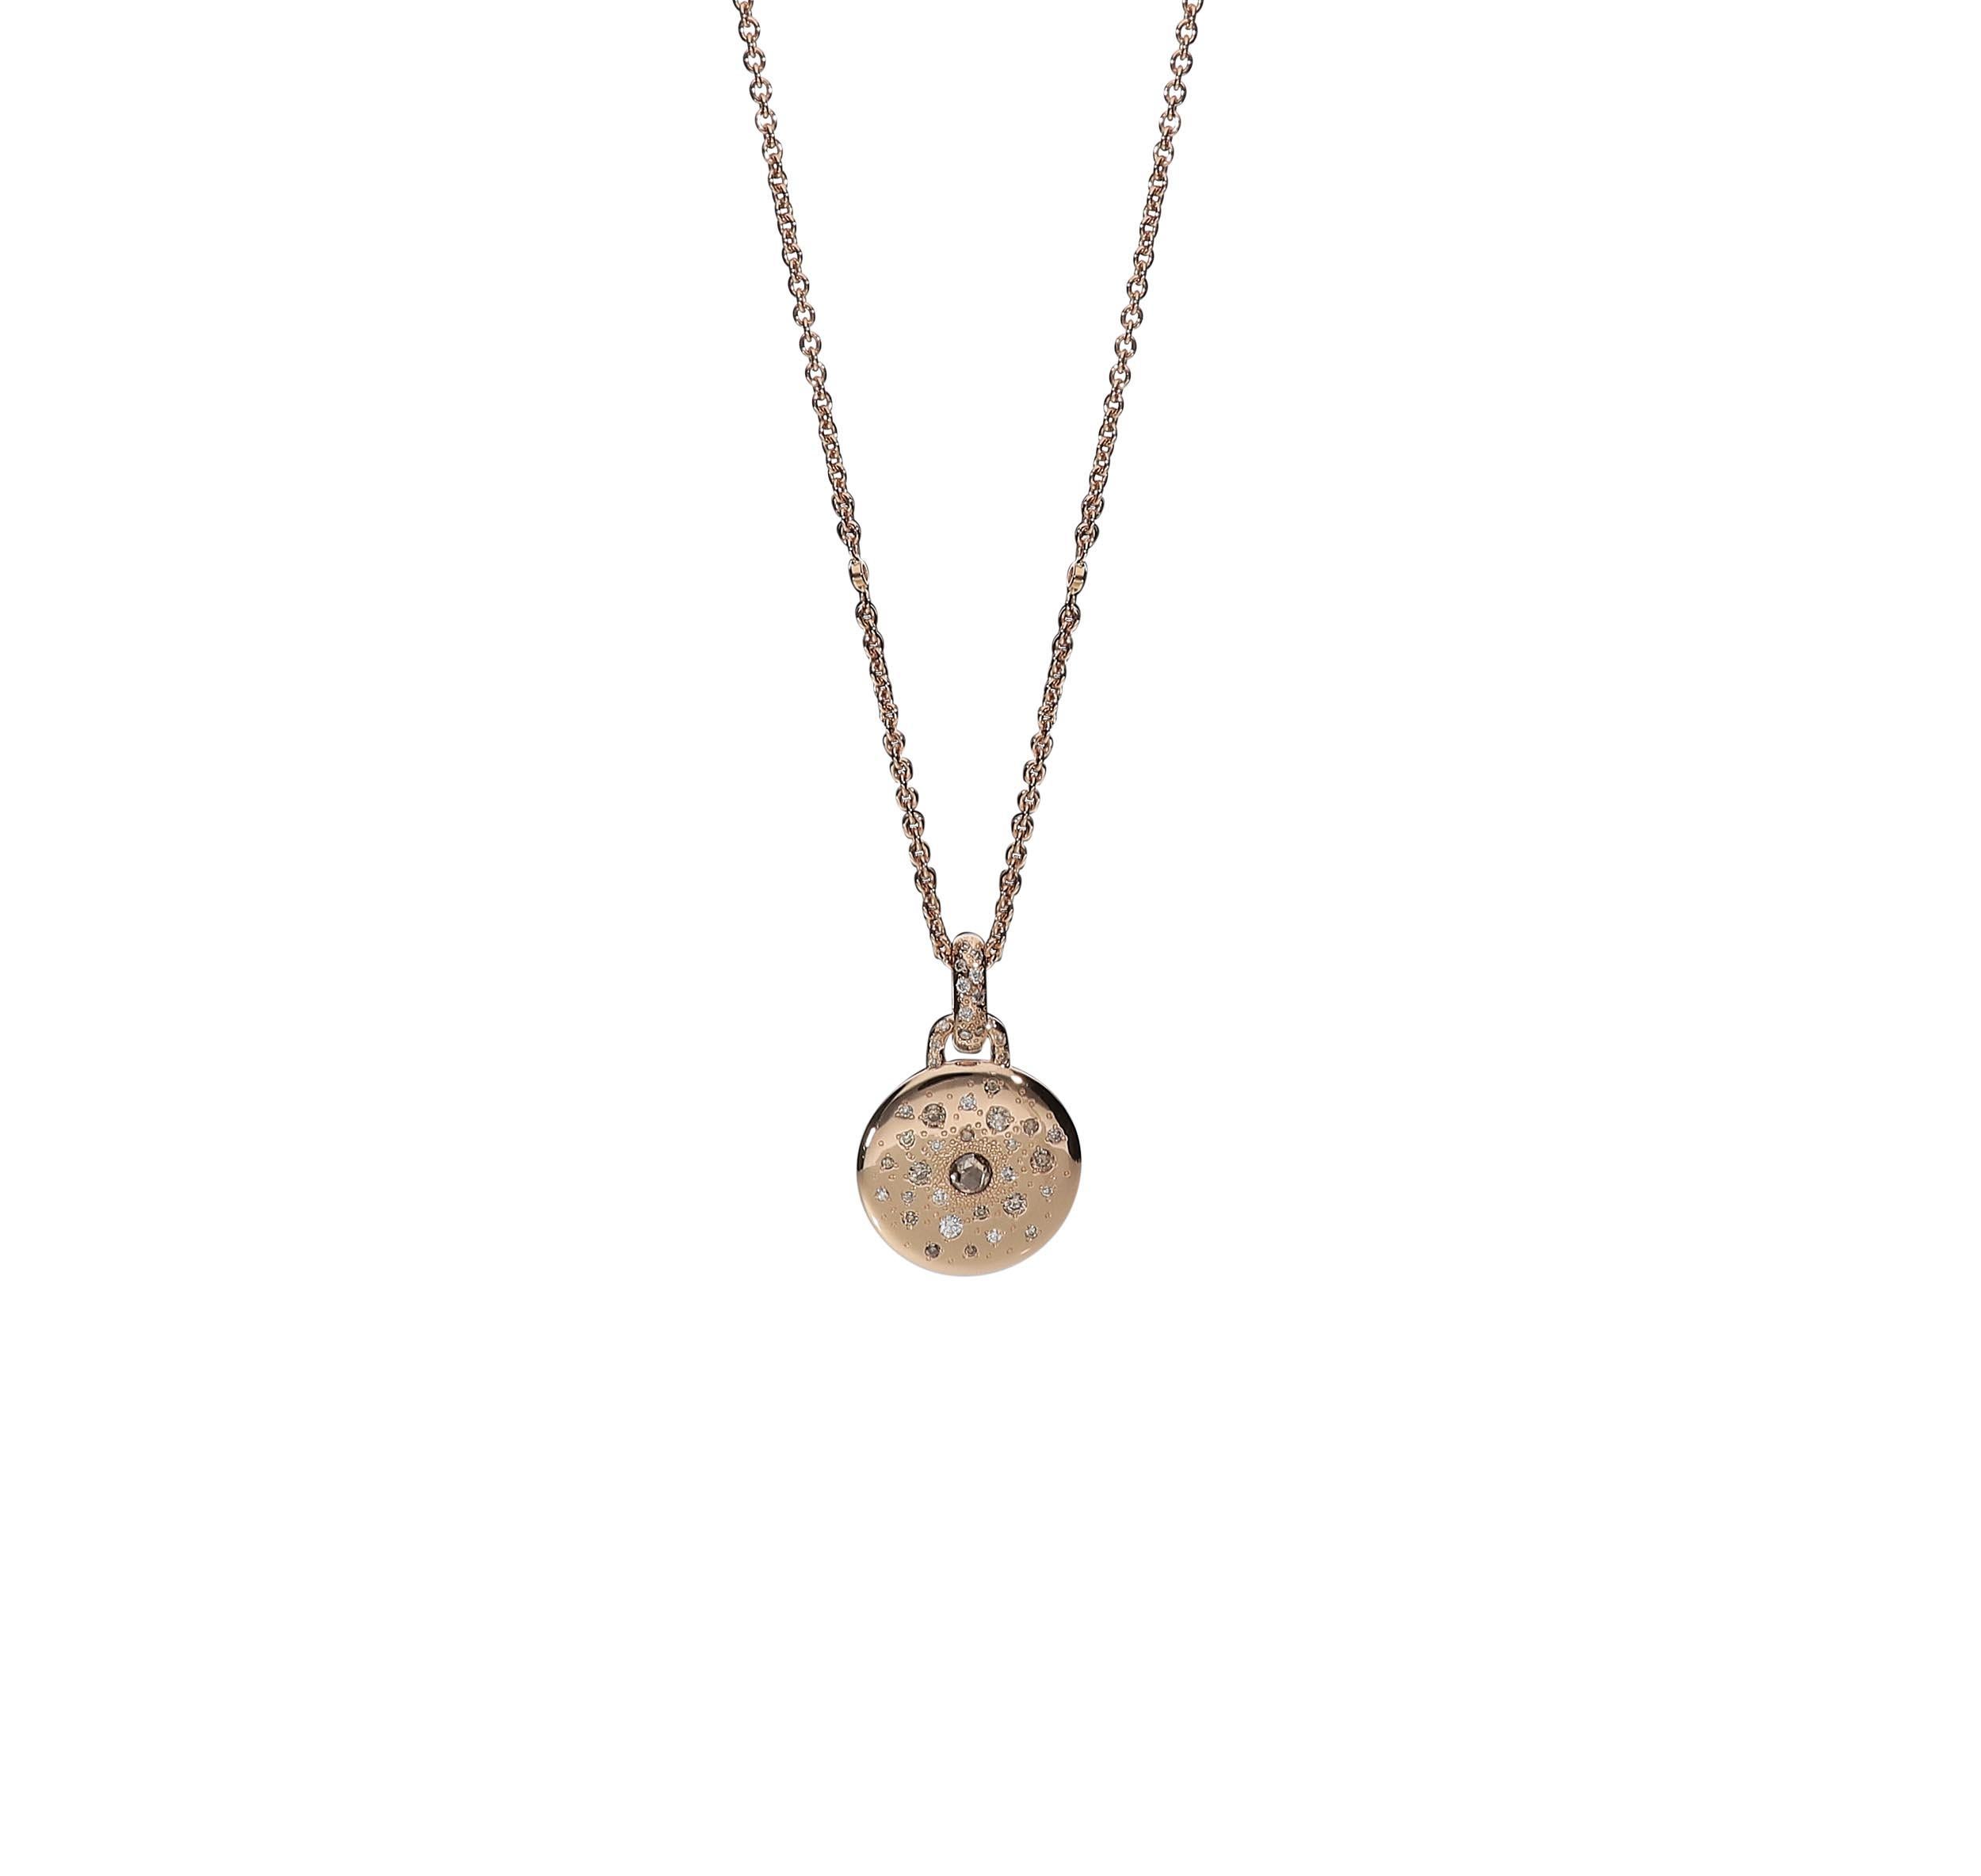 Circle pendant necklace in 18kt pink gold for 11,00 grams with a mix of white round brilliant diamonds color G clarity SI for 0,13 carat and brown round brilliant diamonds for 0,59 carat.
Diameter of the circle pendant is 2 centimeters, the length